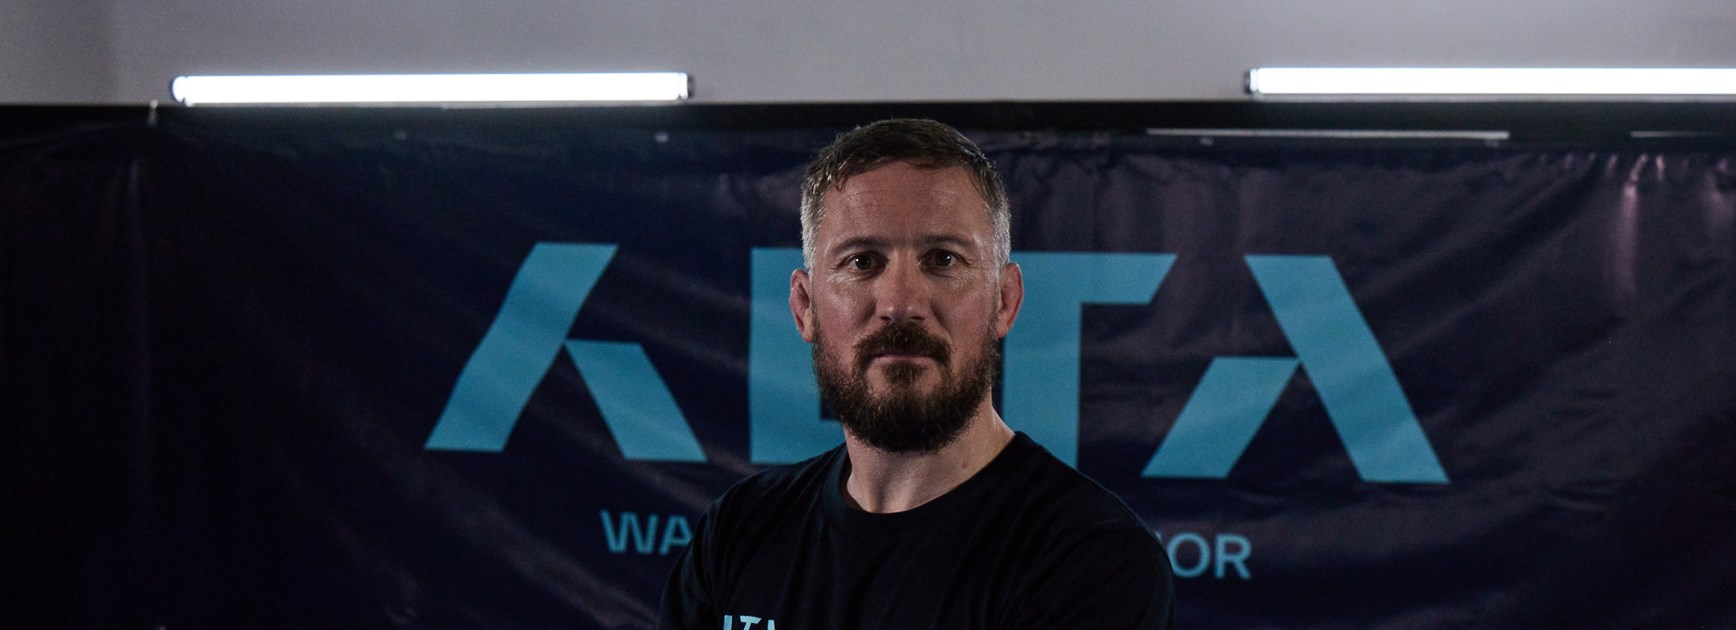 John Kavanagh makes special visit to Sea Eagles